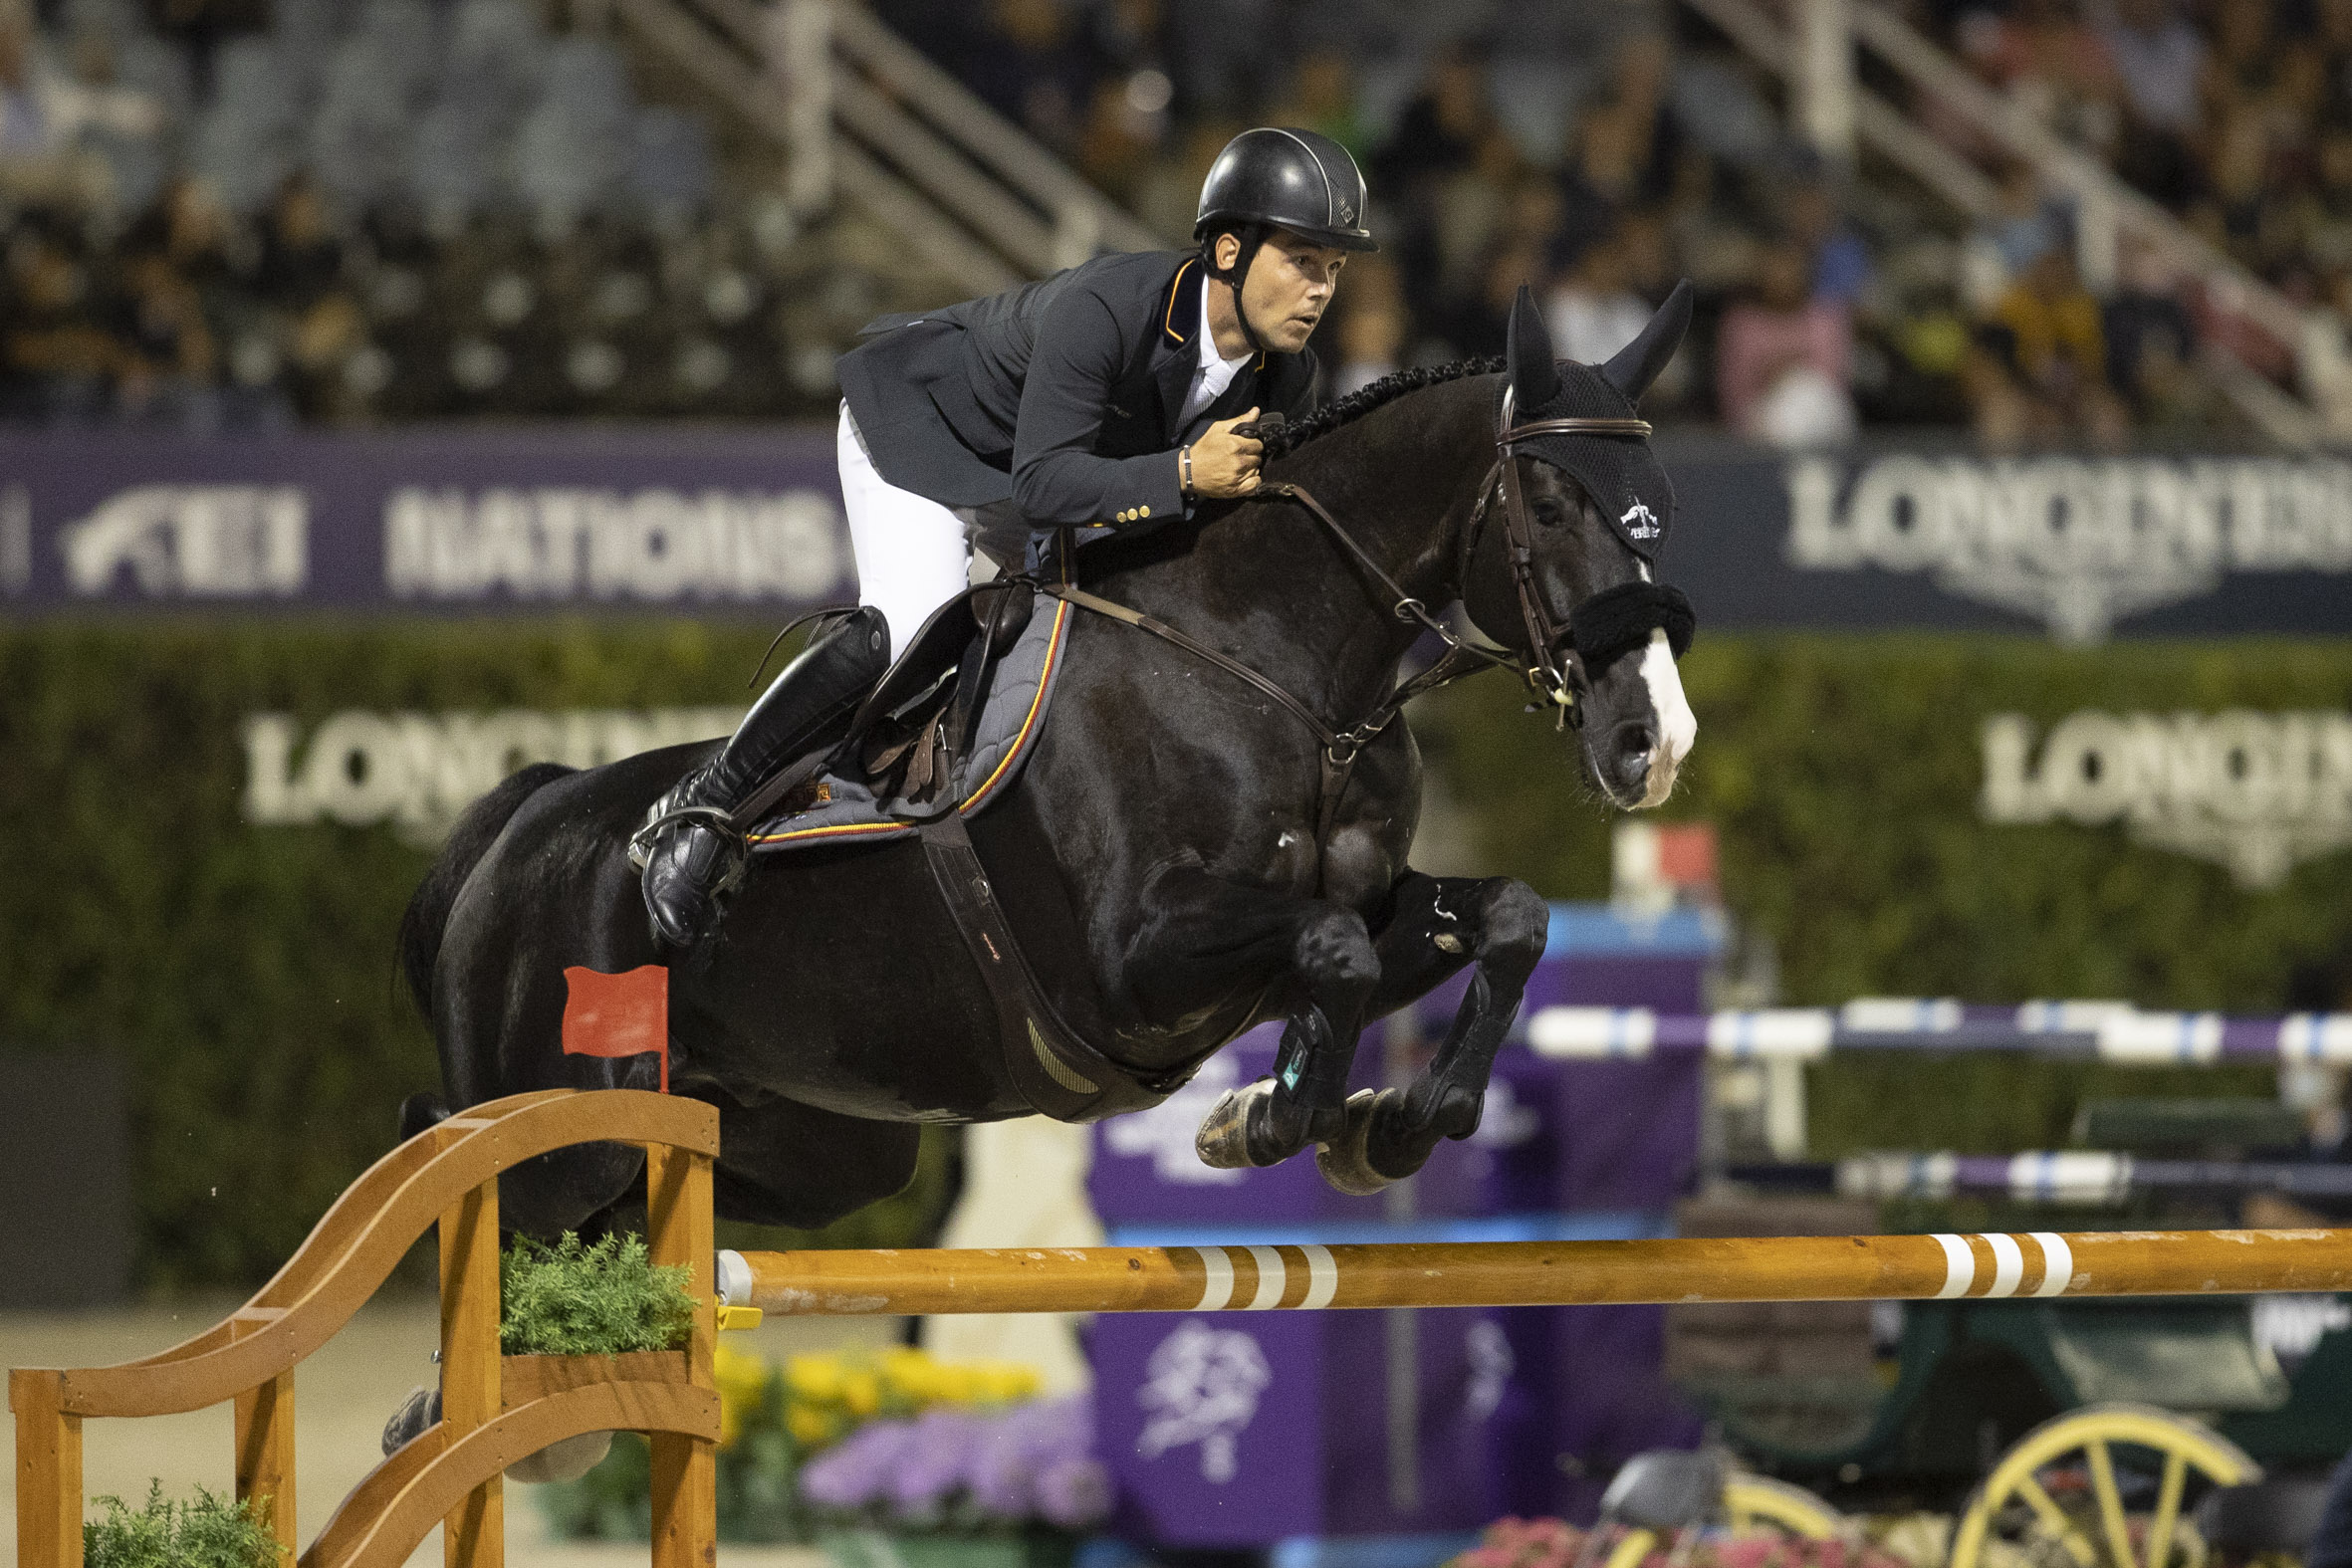 Spain classified for the Longines Nations Cup Final for the first time